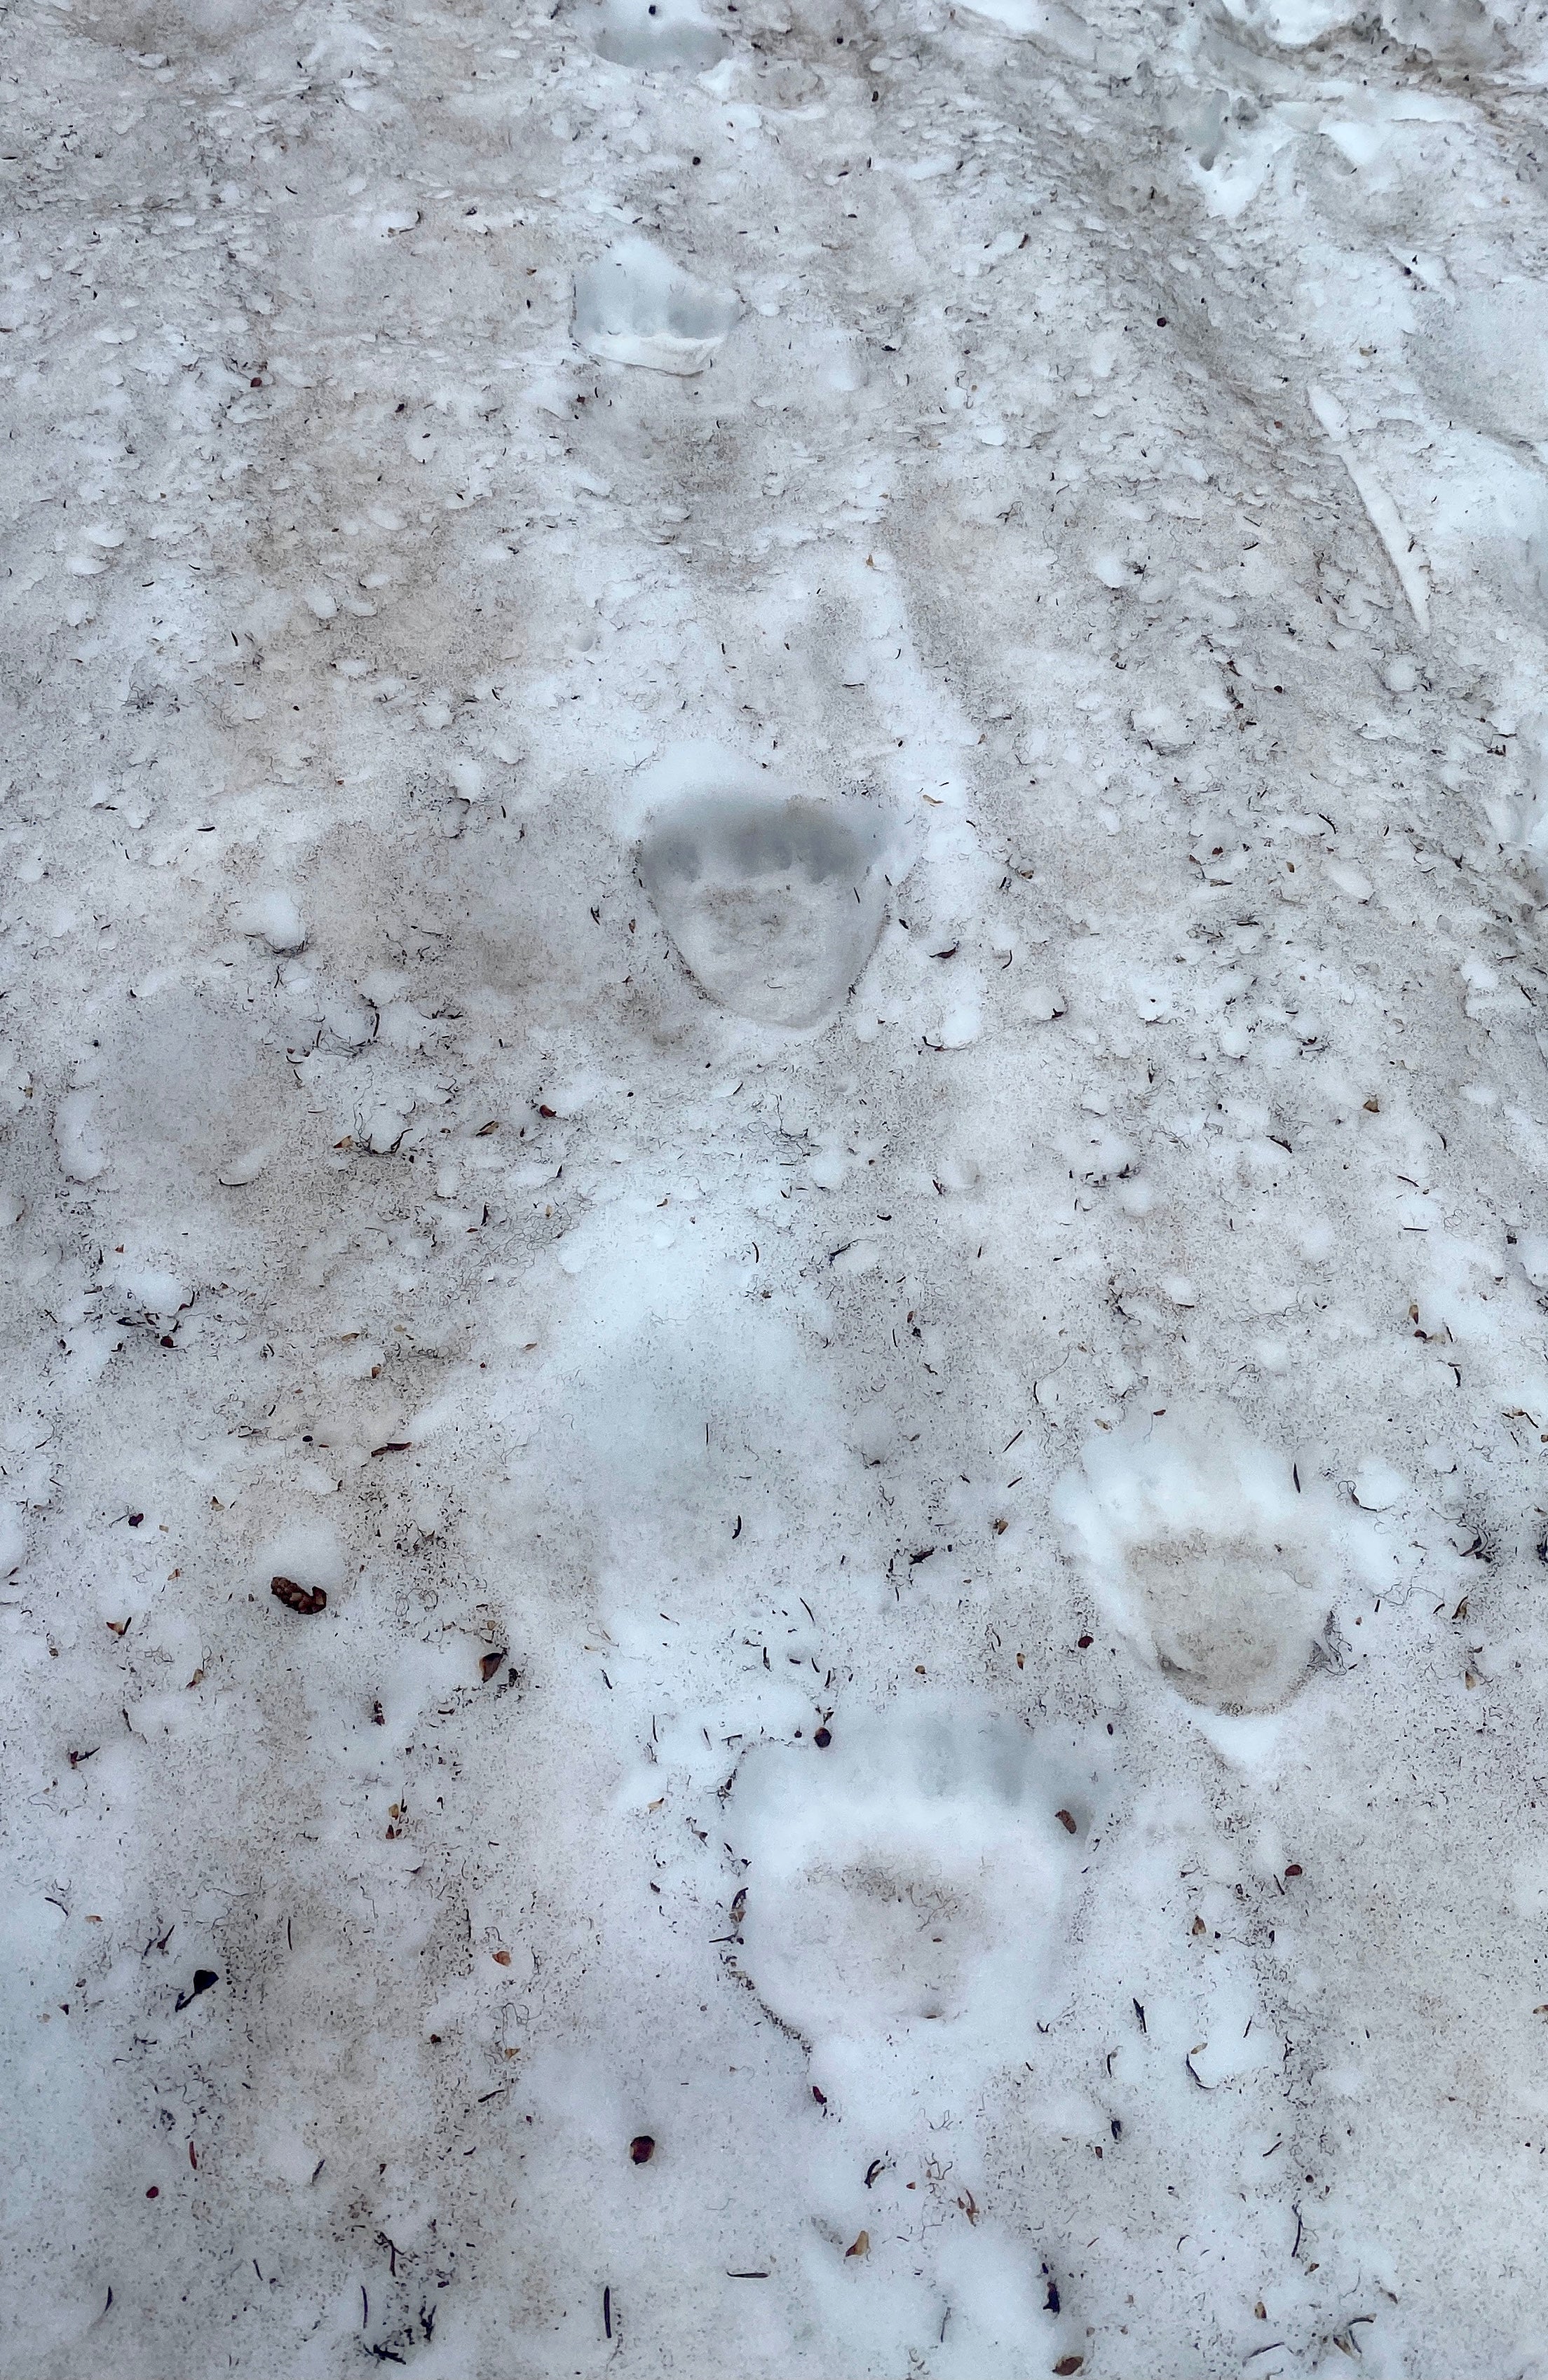 image shows a dirty snowbank with huge bear footprints stamped into the snow